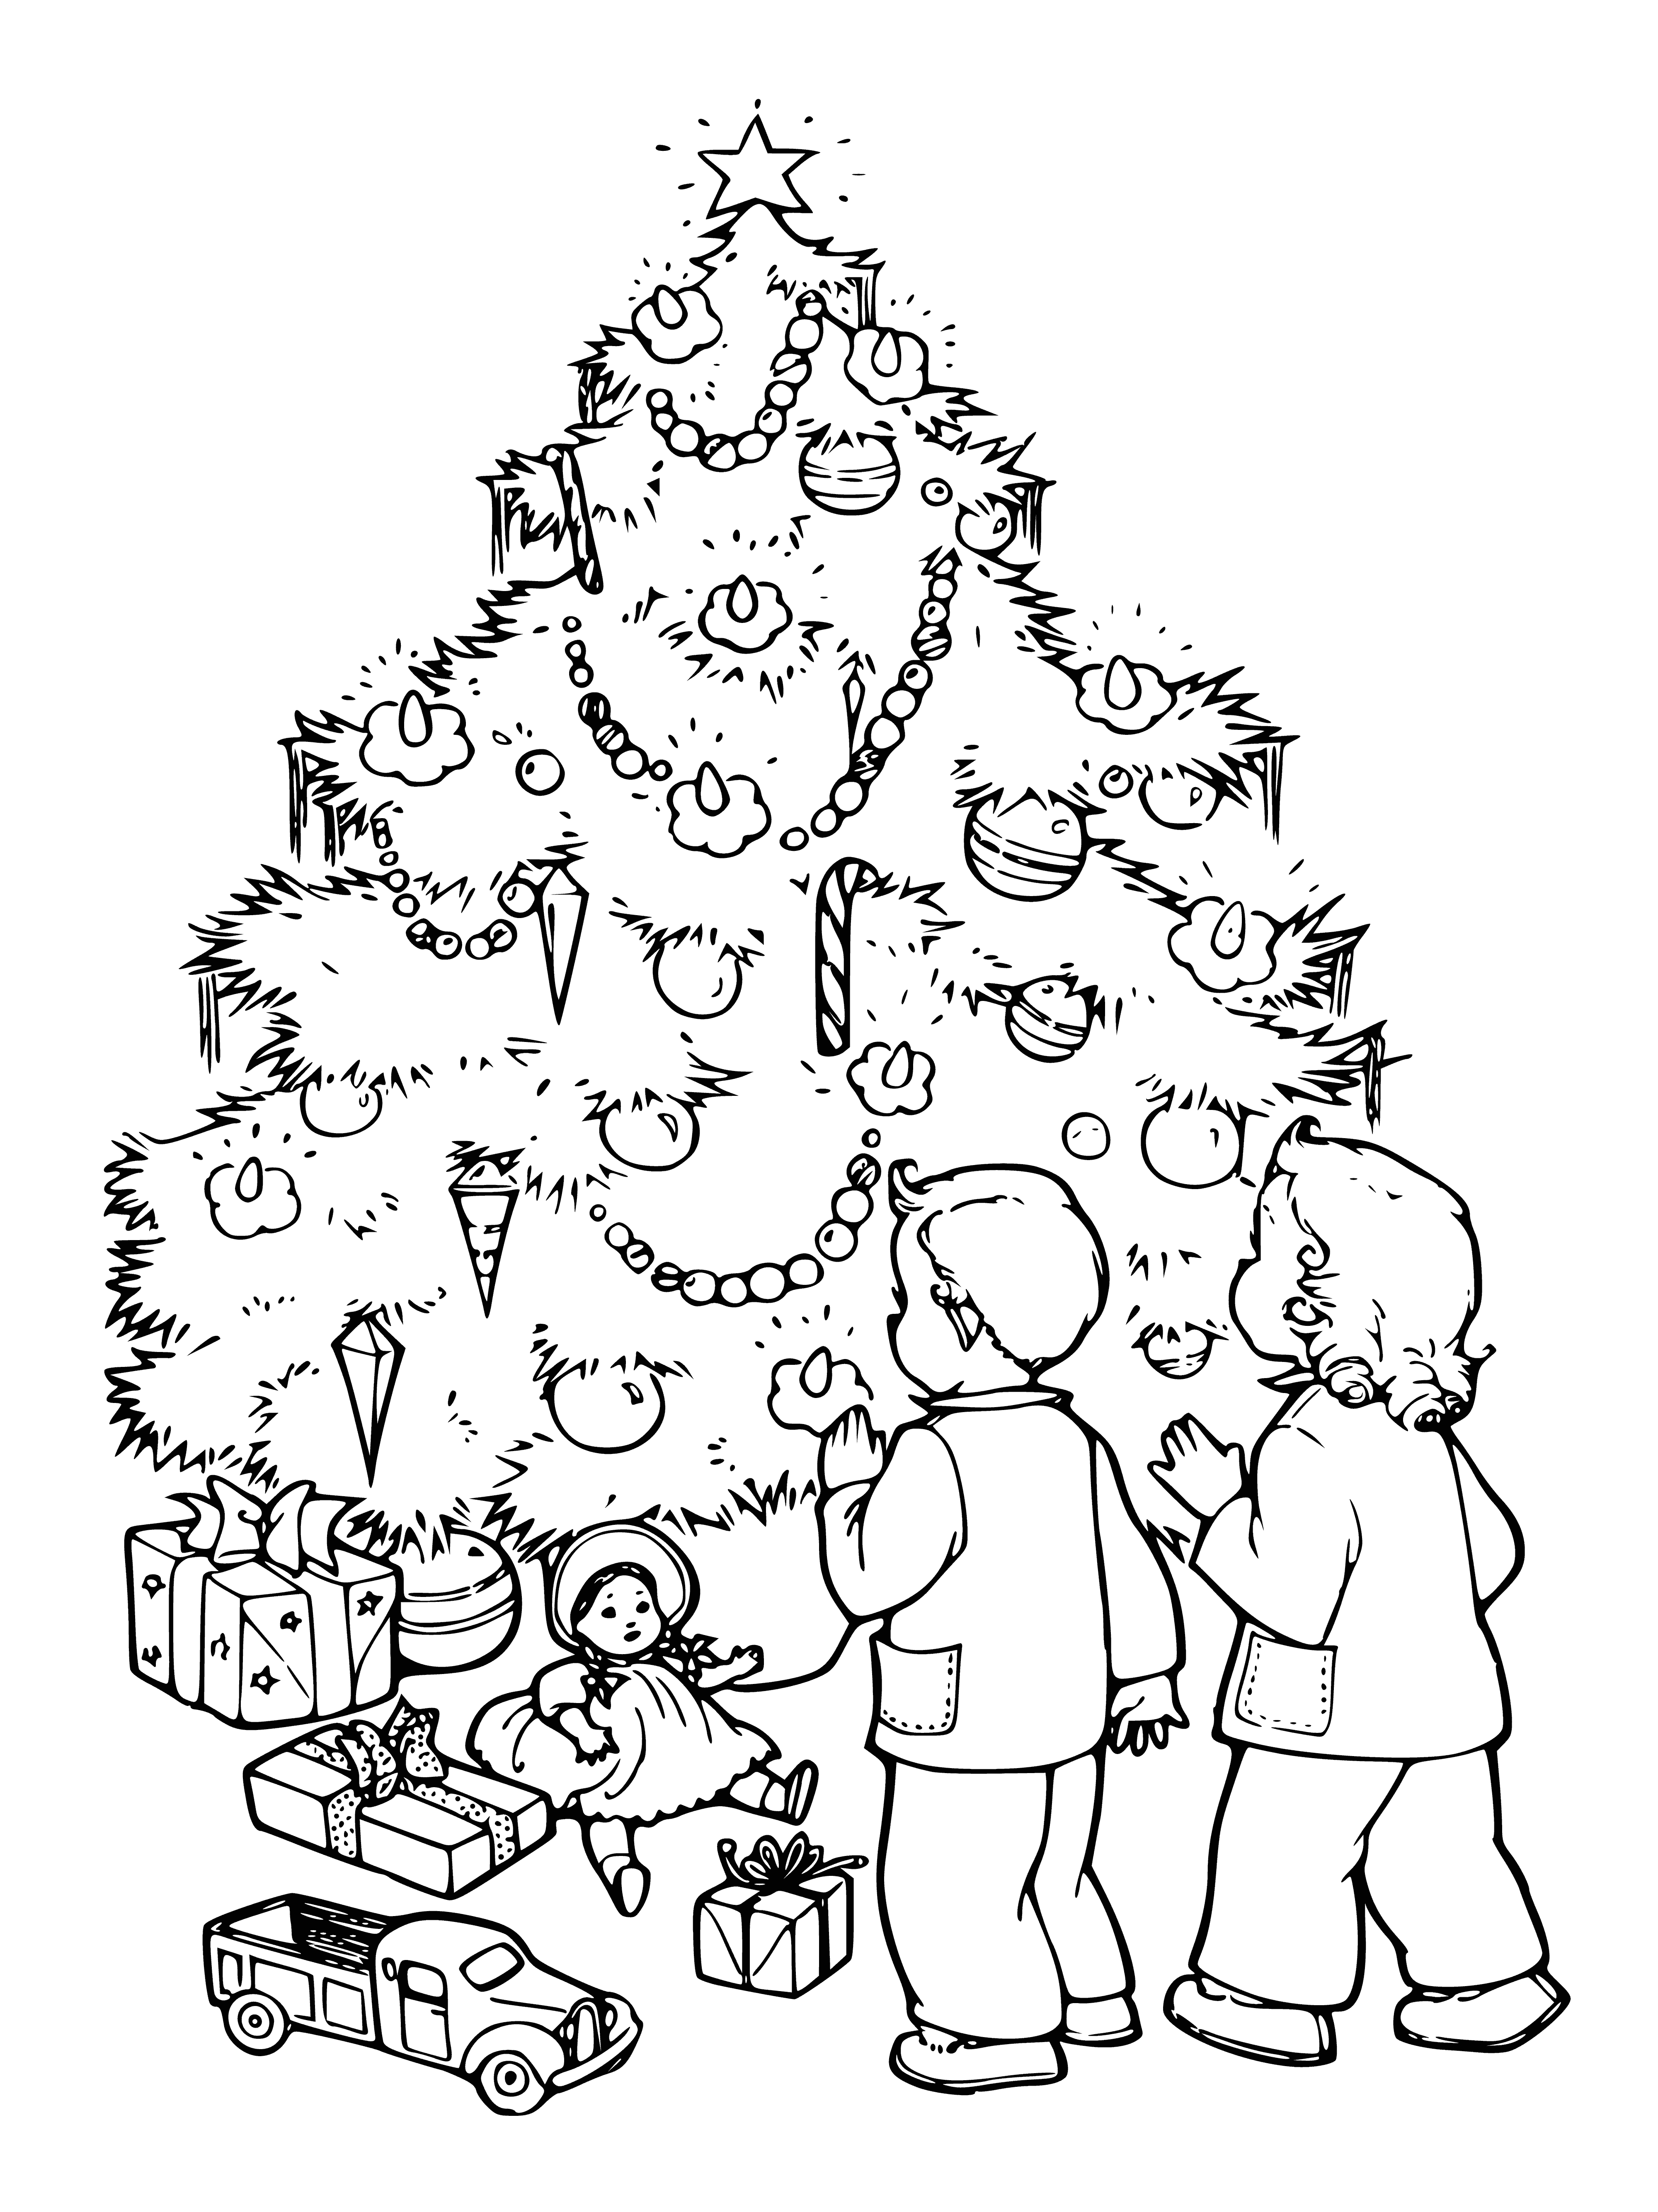 coloring page: A tall green Christmas tree with a star on top, adorned with lights and decorations.